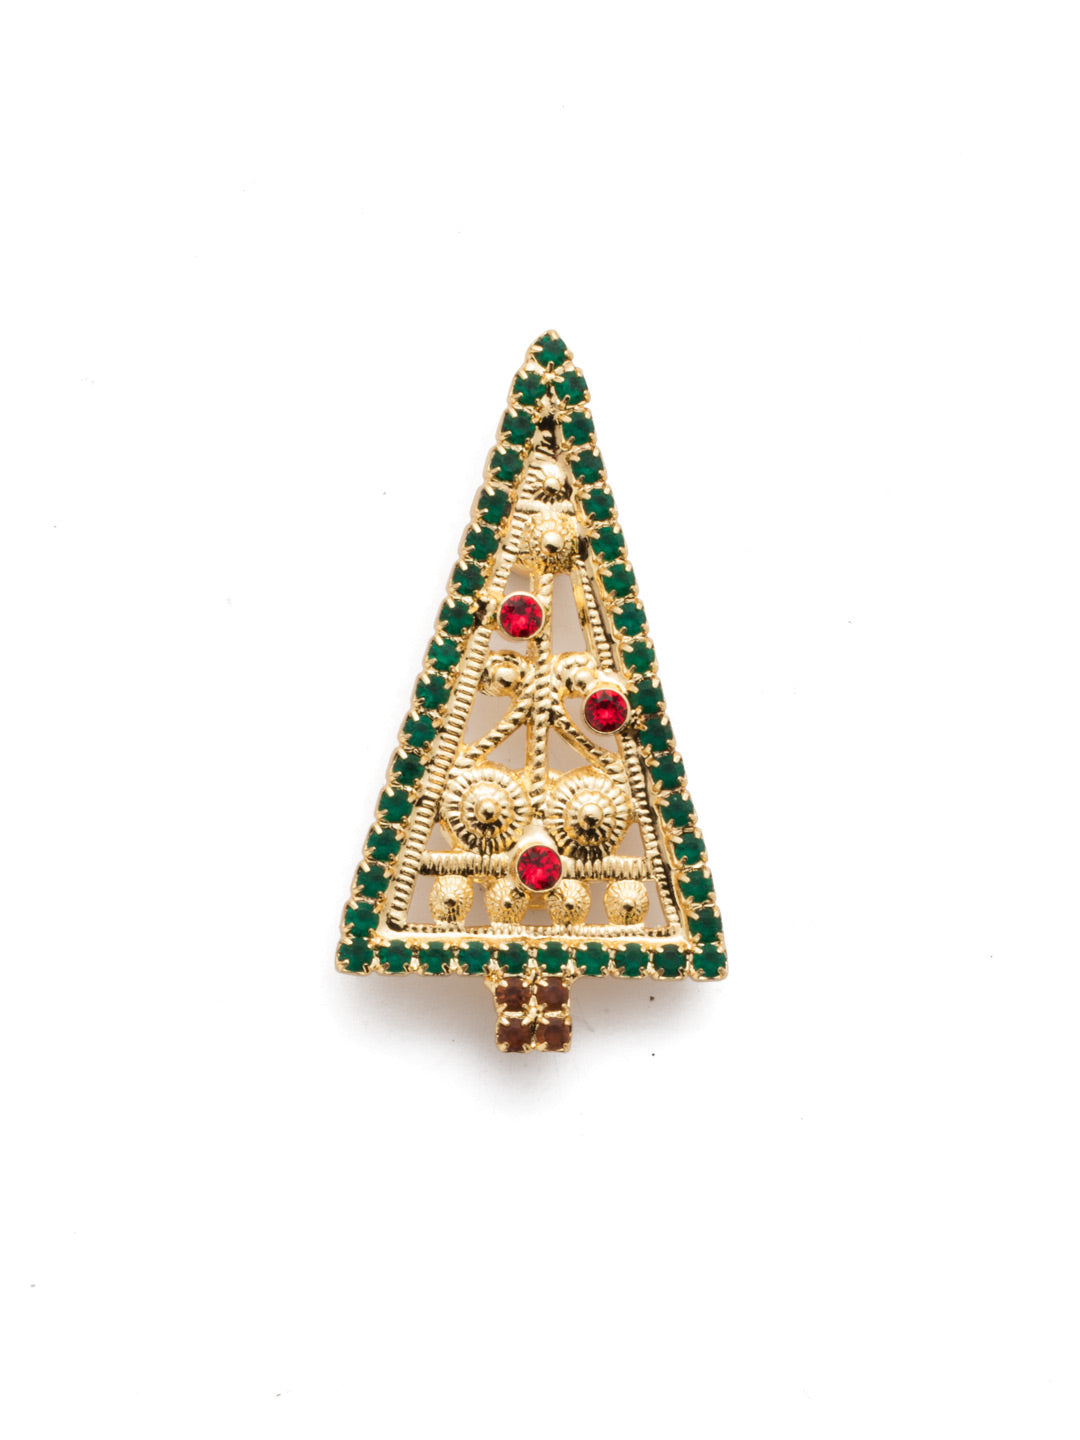 Spruce Magnetic Charm - CHM7BGMR - <p>The Spruce Magnetic Charm will make you feel jolly when bag, blazer, dress or refrigerator. The charm is covered in mulipule colored crystals that resemble a christmas tree. From Sorrelli's Multi Red collection in our Bright Gold-tone finish.</p>